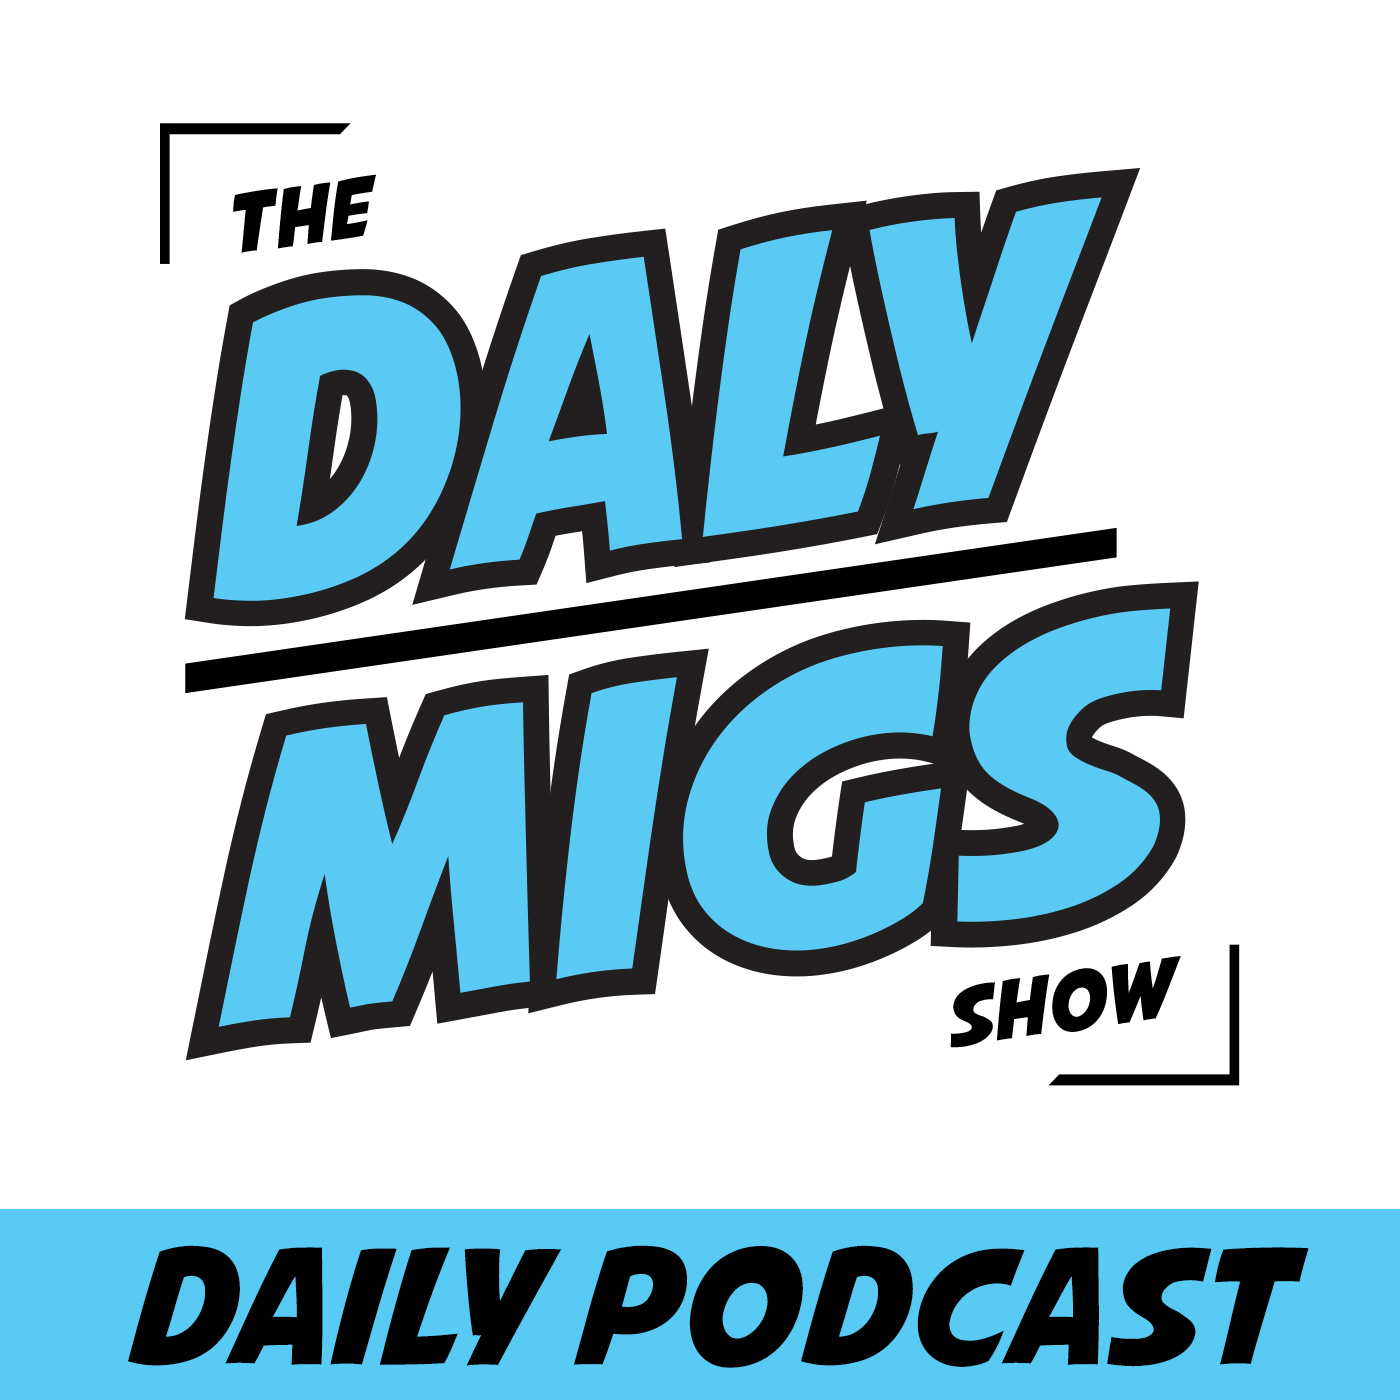 Daily Podcast pt. 4 - "A guy could go to prison because of a donut."